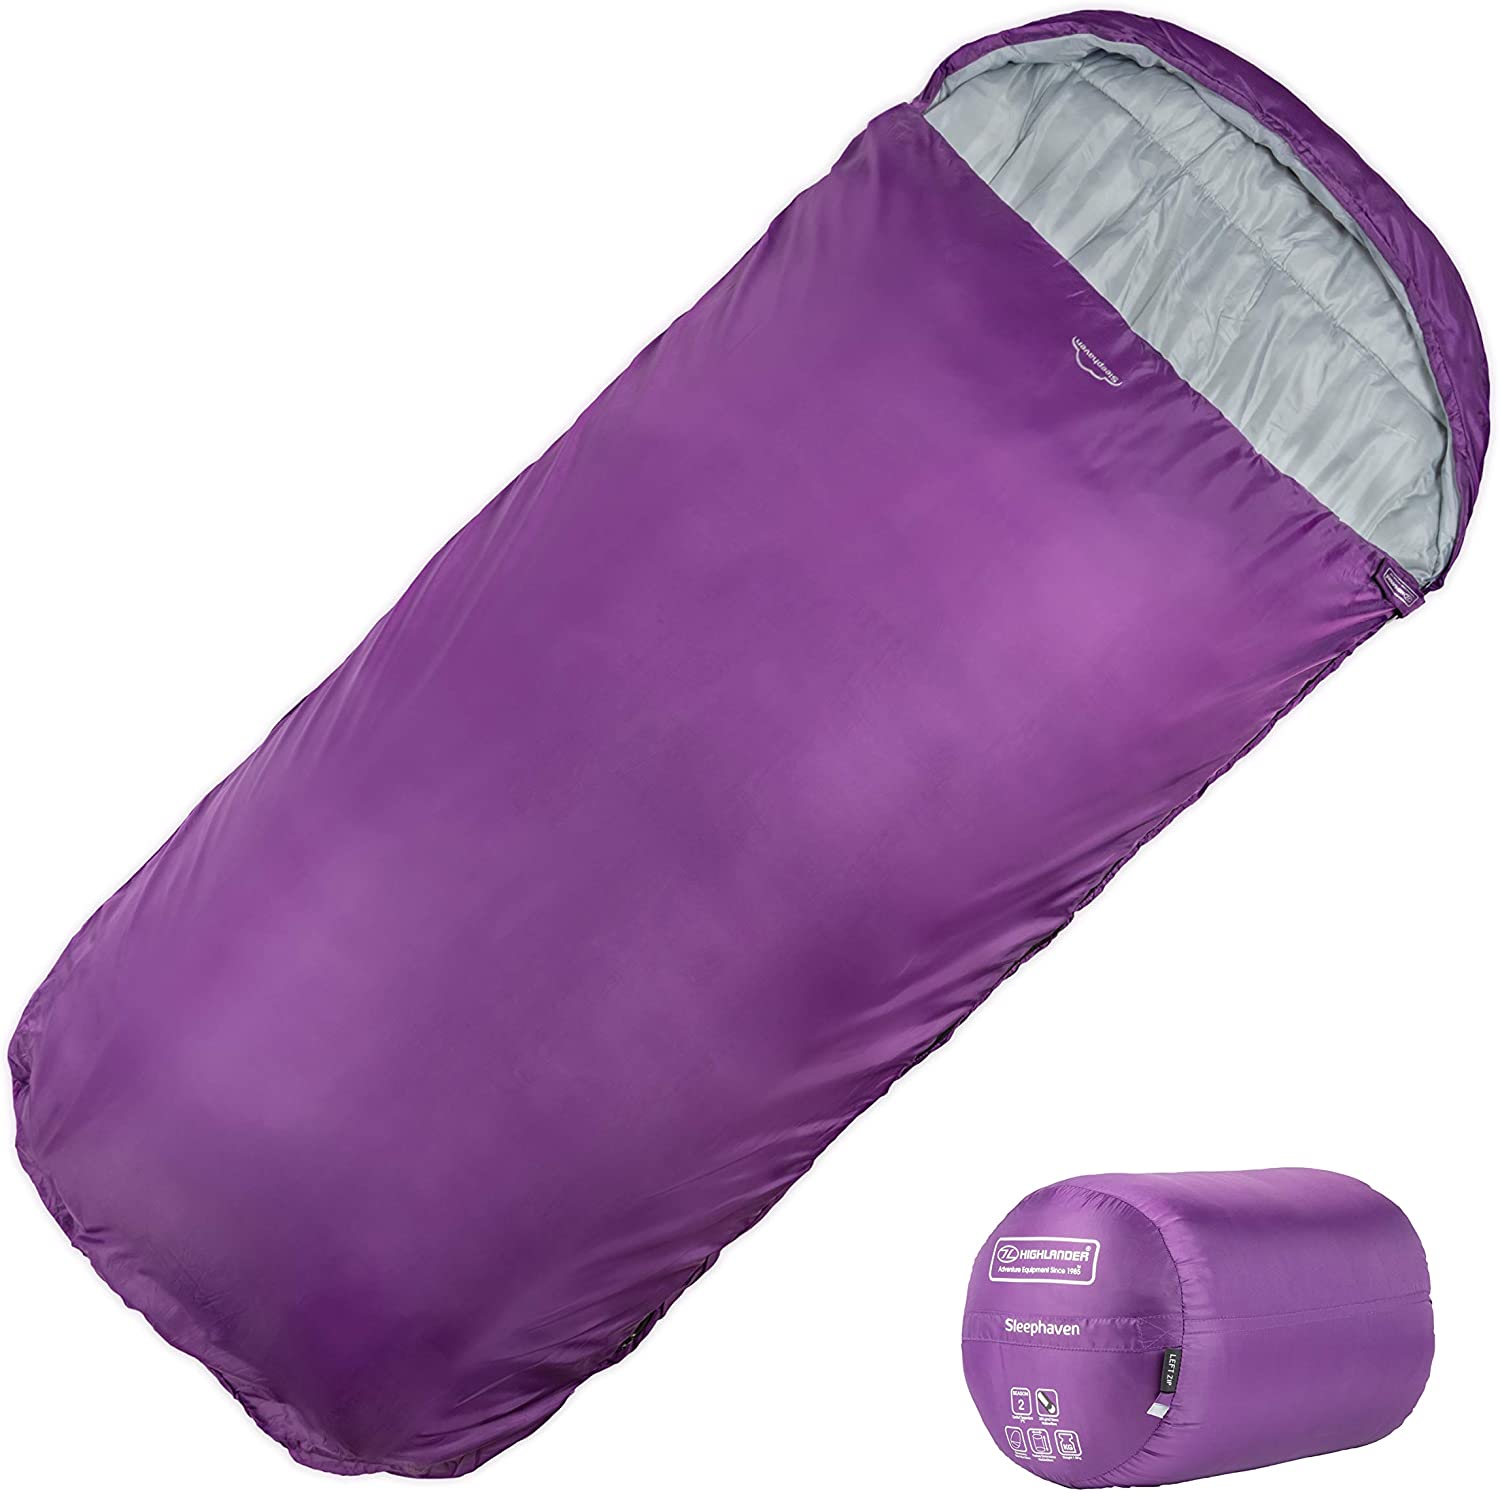 XL Sleeping Bag by Highlander Extra Large Pod Design perfect for Camping and 